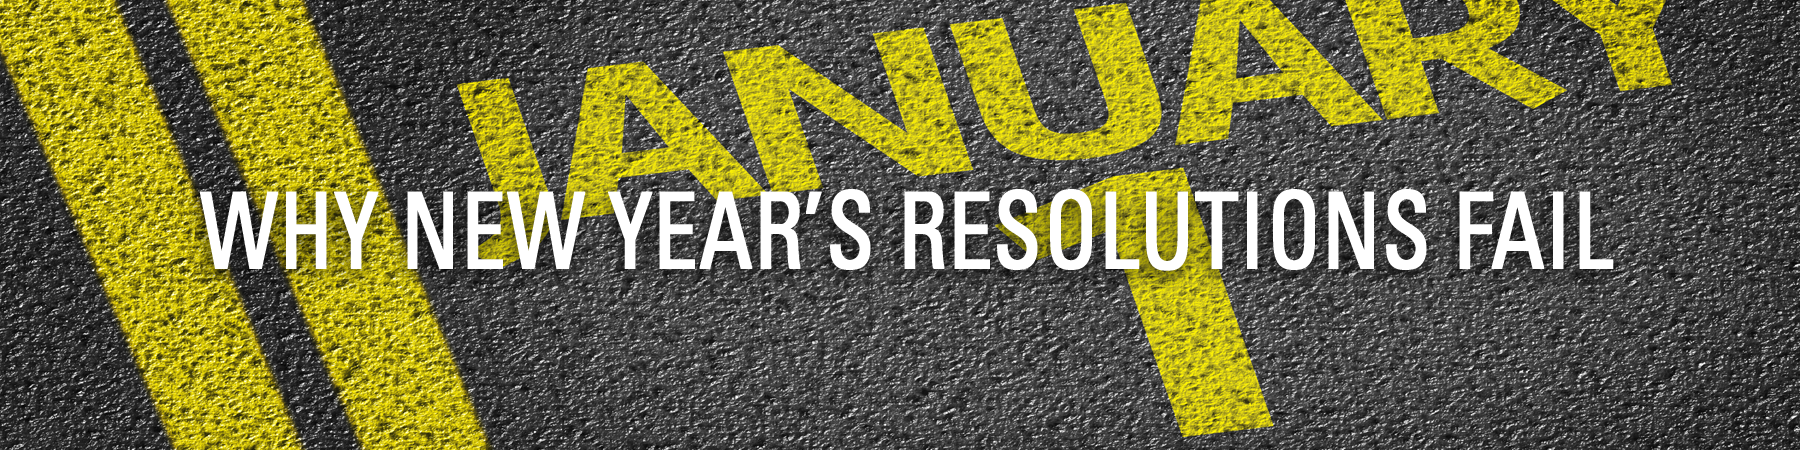 Why New Year’s Resolutions Fail